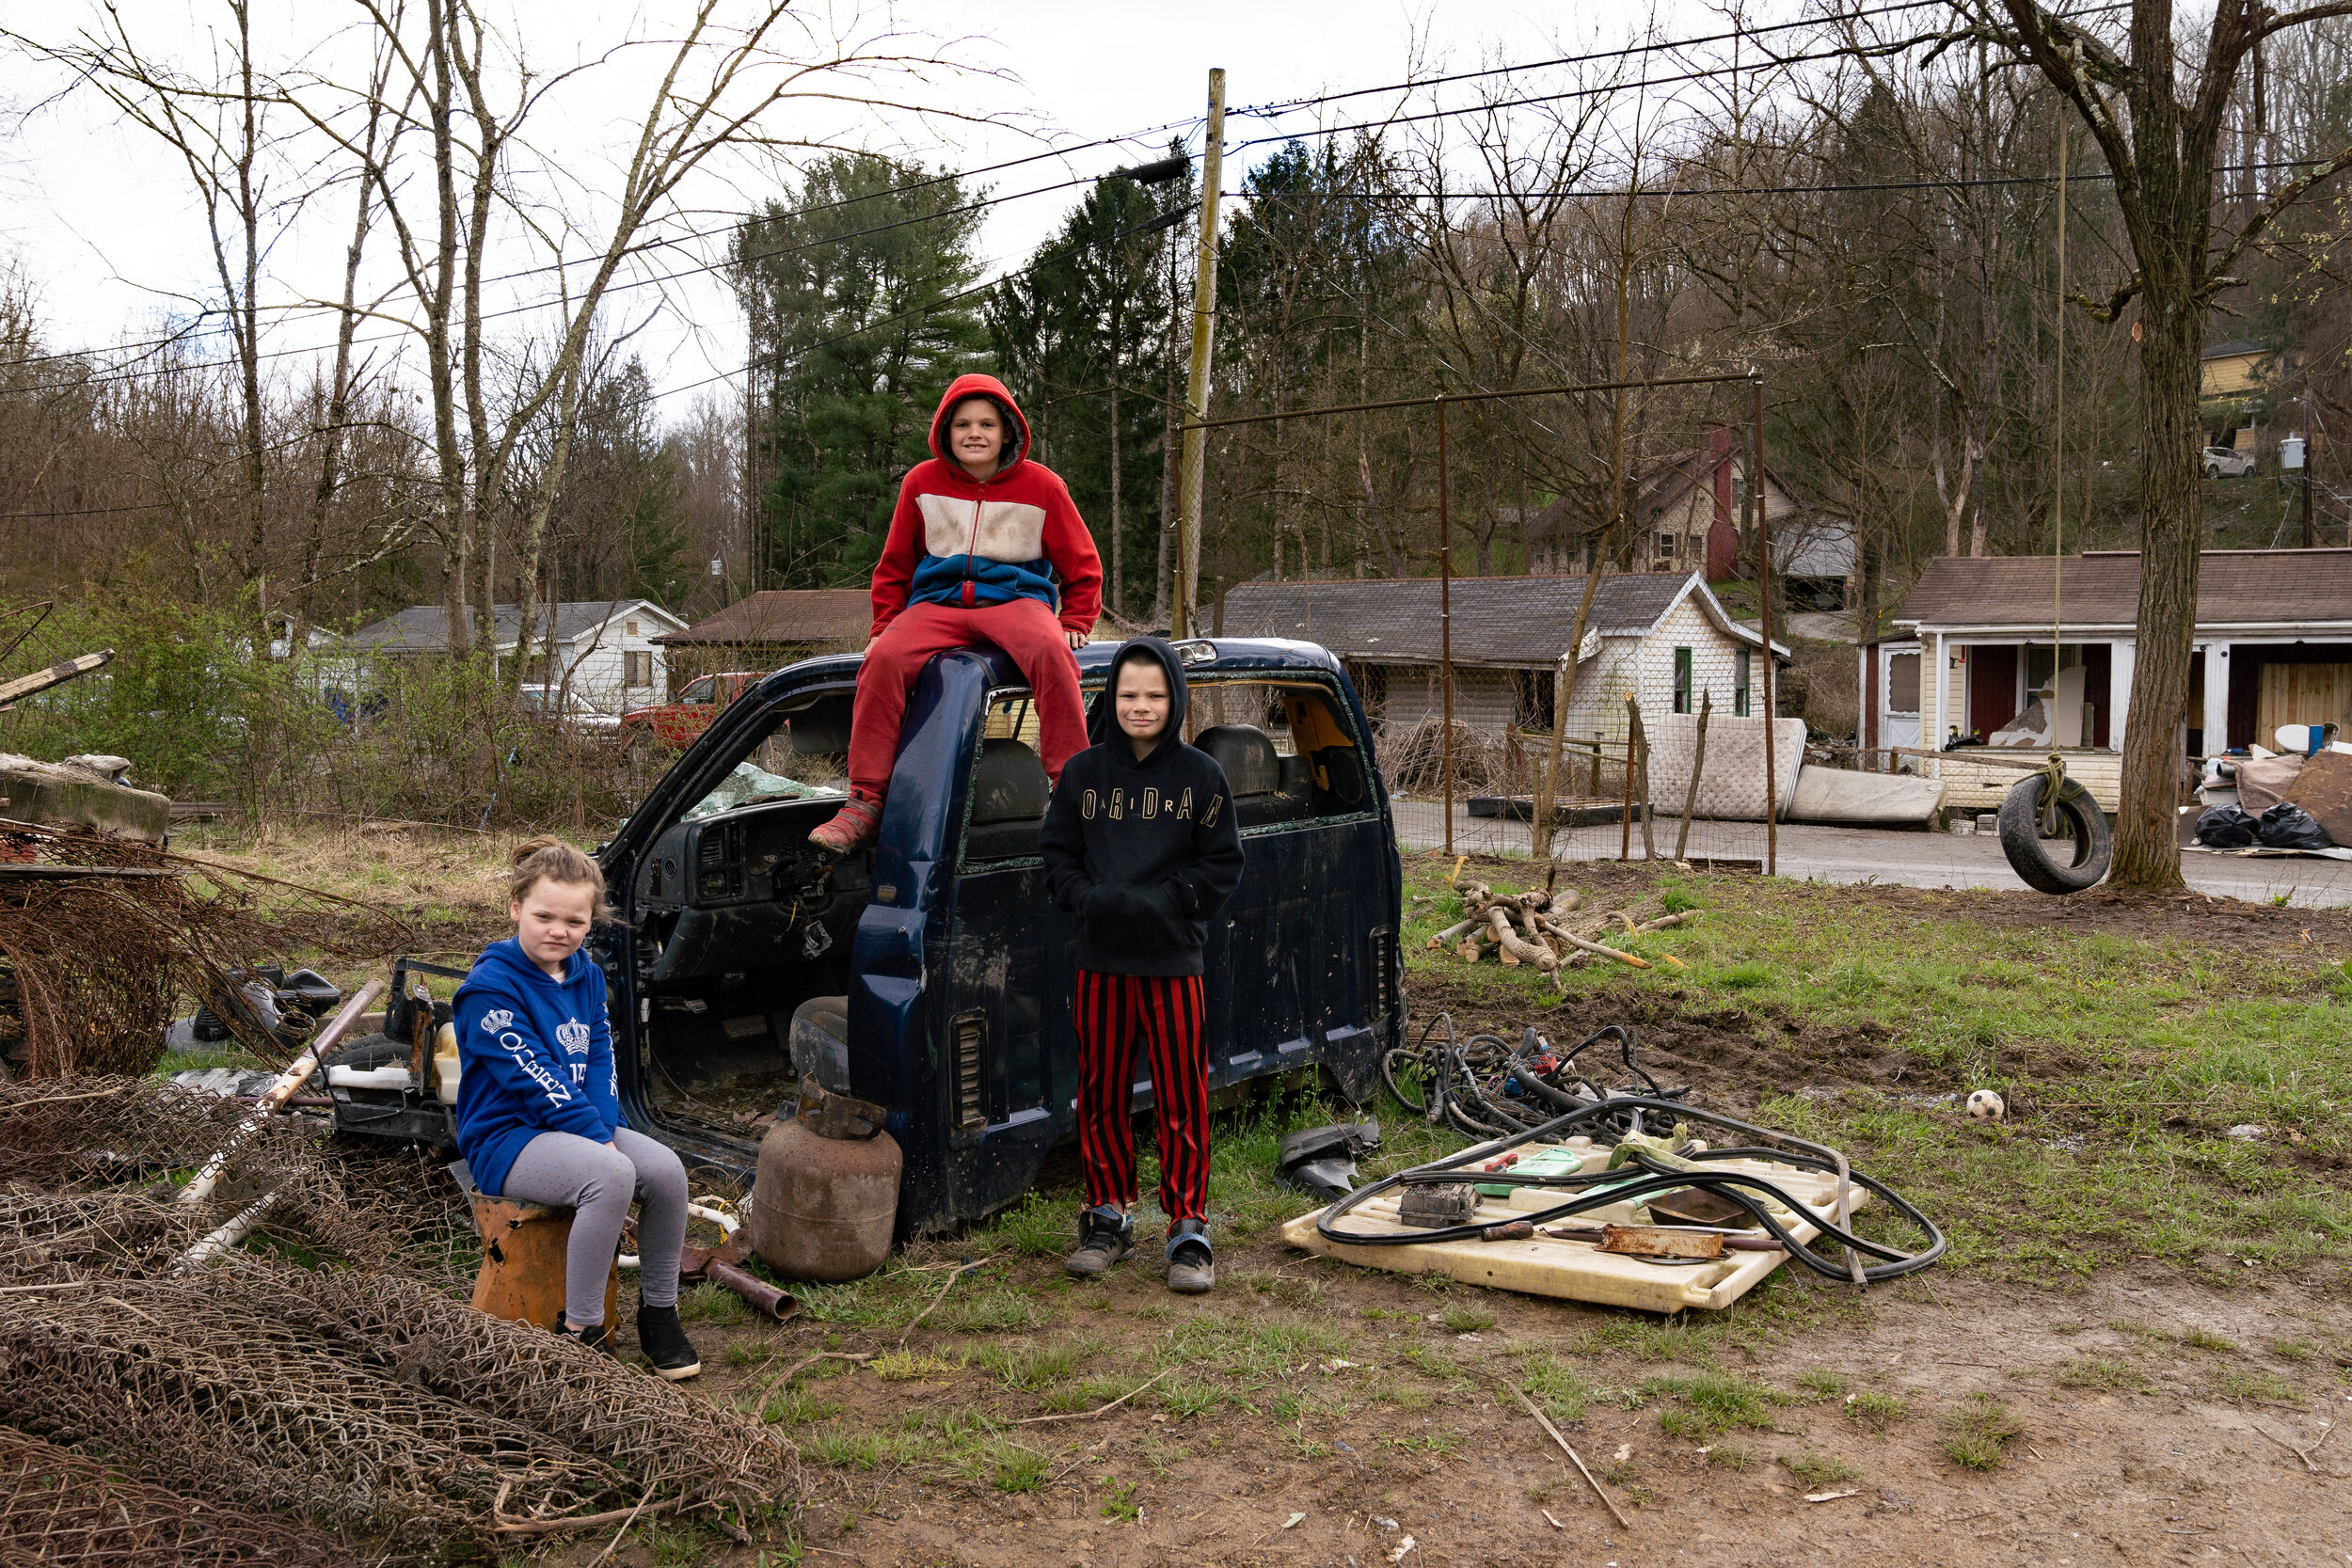  “Our aunty is inside, she isn’t coming out, but she said it’s ok. Can you see the tire swing in the picture? It’s ours.” - Aaliyah (Aaliyah, Dyllon, Alec) 04/01/20 (National, WV) 